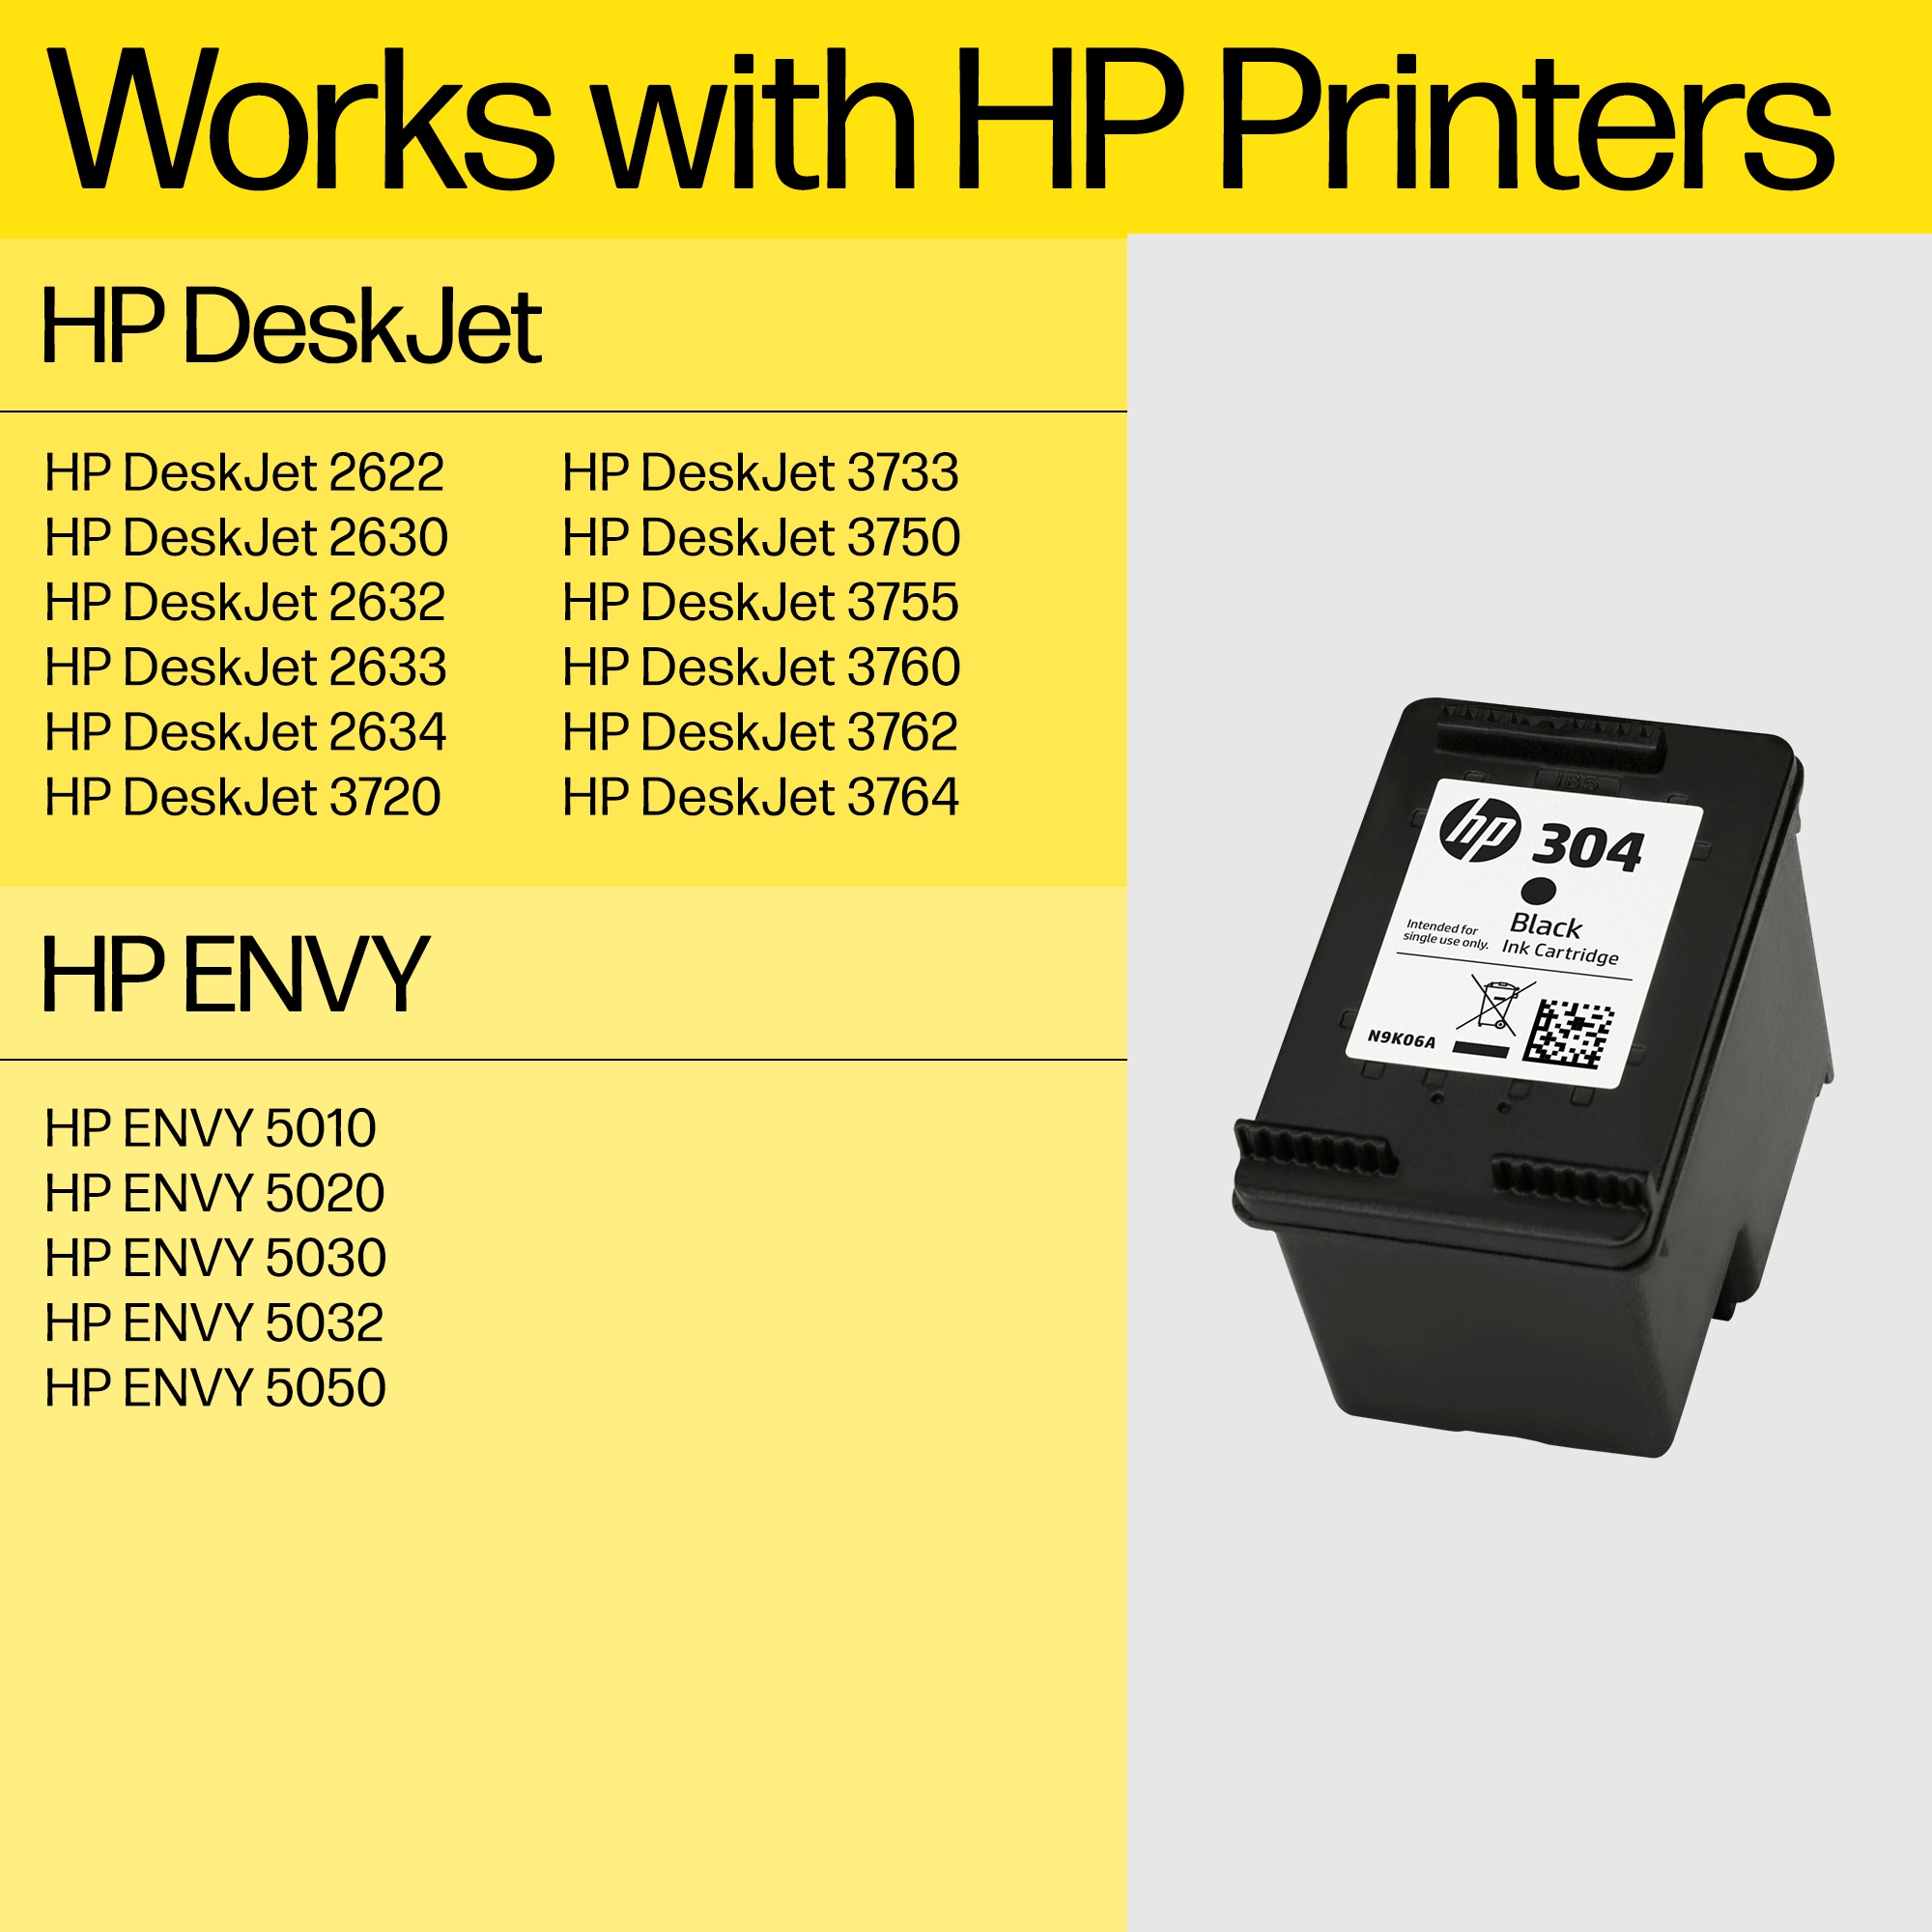 Stock 14571 in for 120 + HP pg In for stock 100 resellers pack DeskJet to black pg Pack=2 sell + cartridge 3JB05AE/304 2620/3720, Printhead Channel HP multi - color distributor/wholesale The